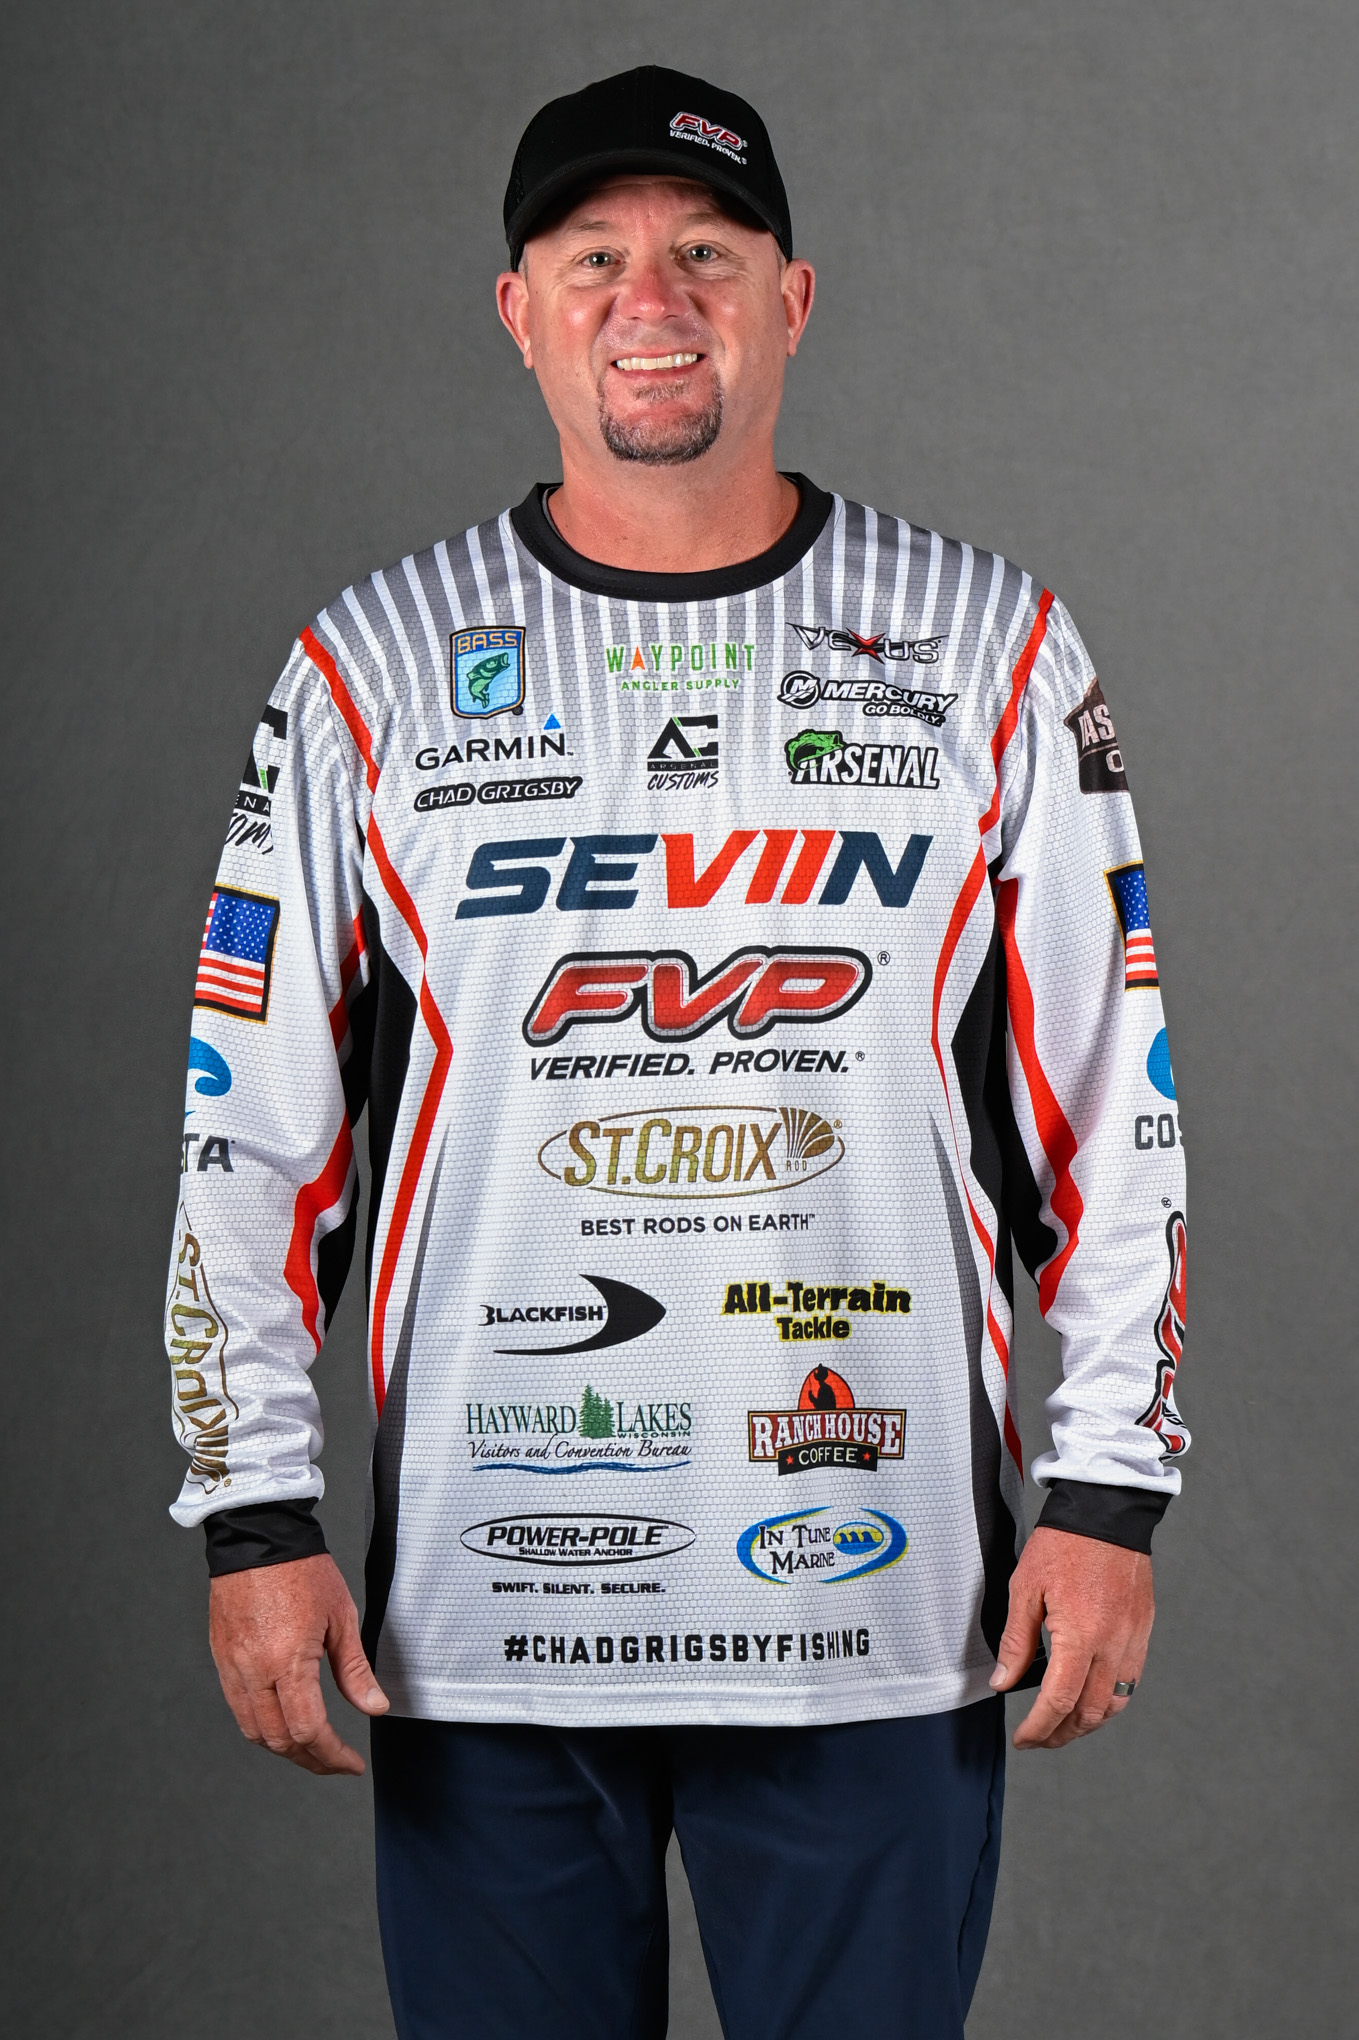 VOICES OF VICTORY: MLF5 Angler Chad Grigsby - Major League Fishing